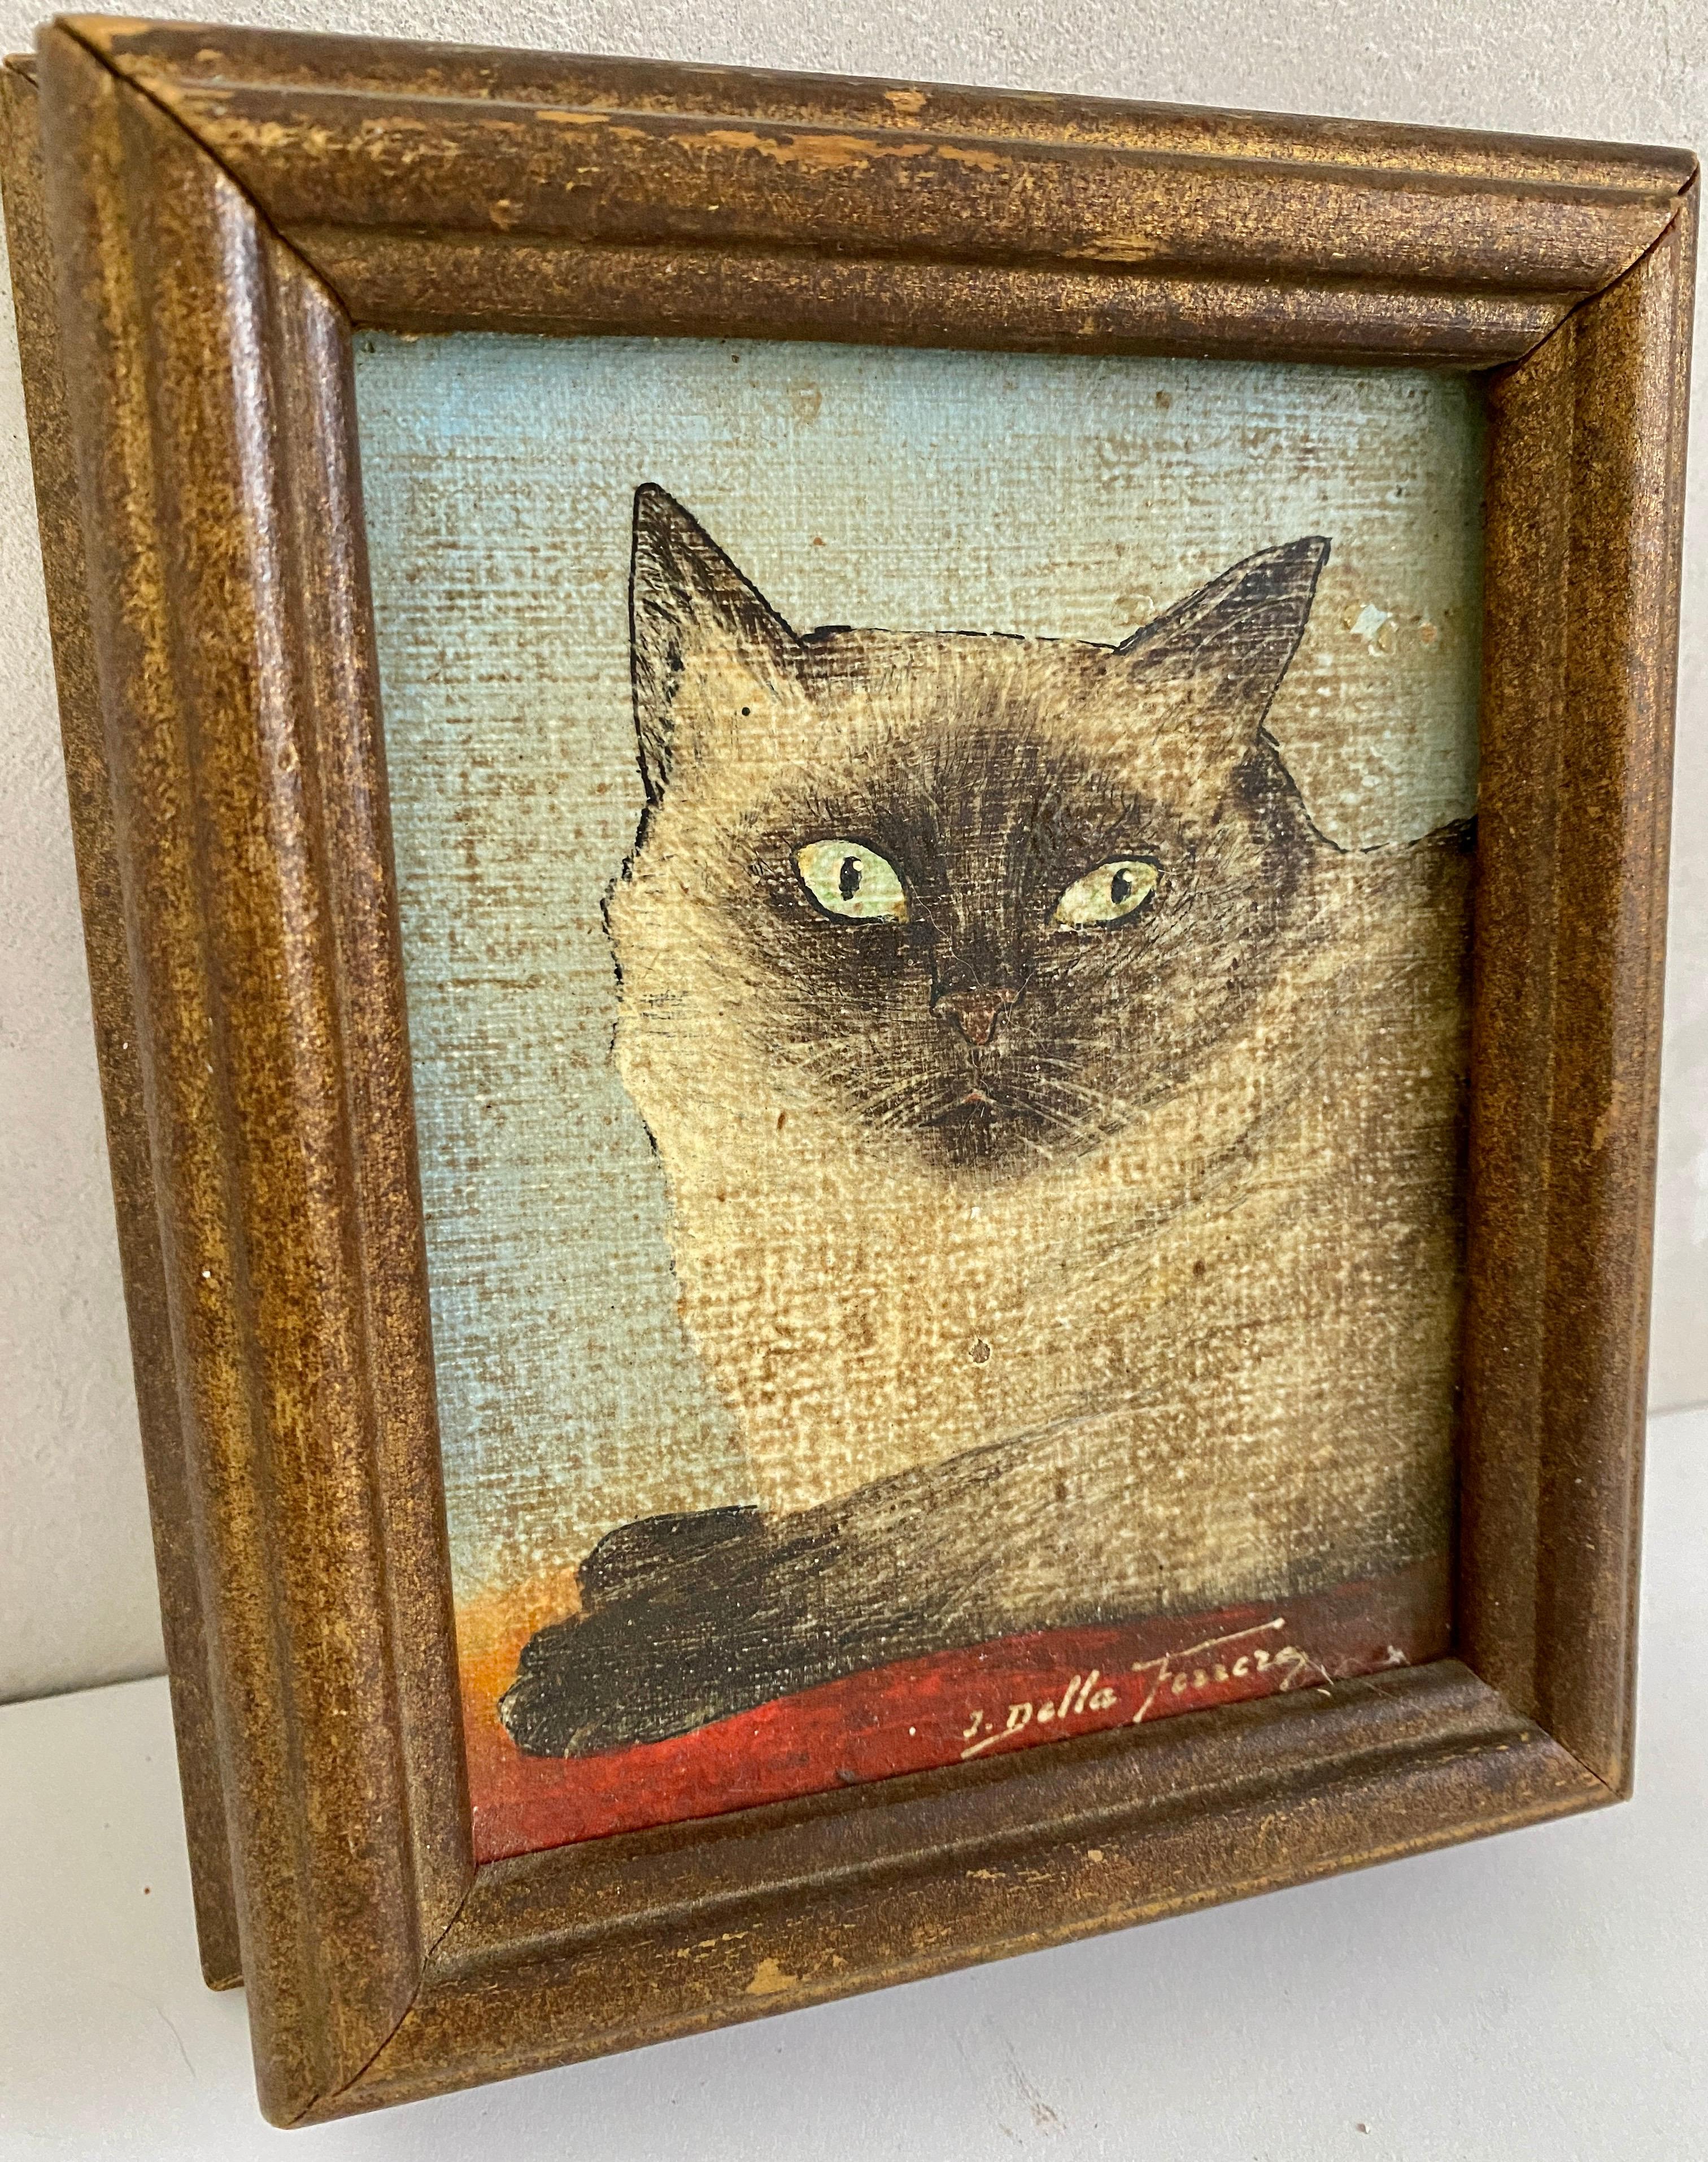 North American Miniature Oil on Board Painting of Siamese Cat